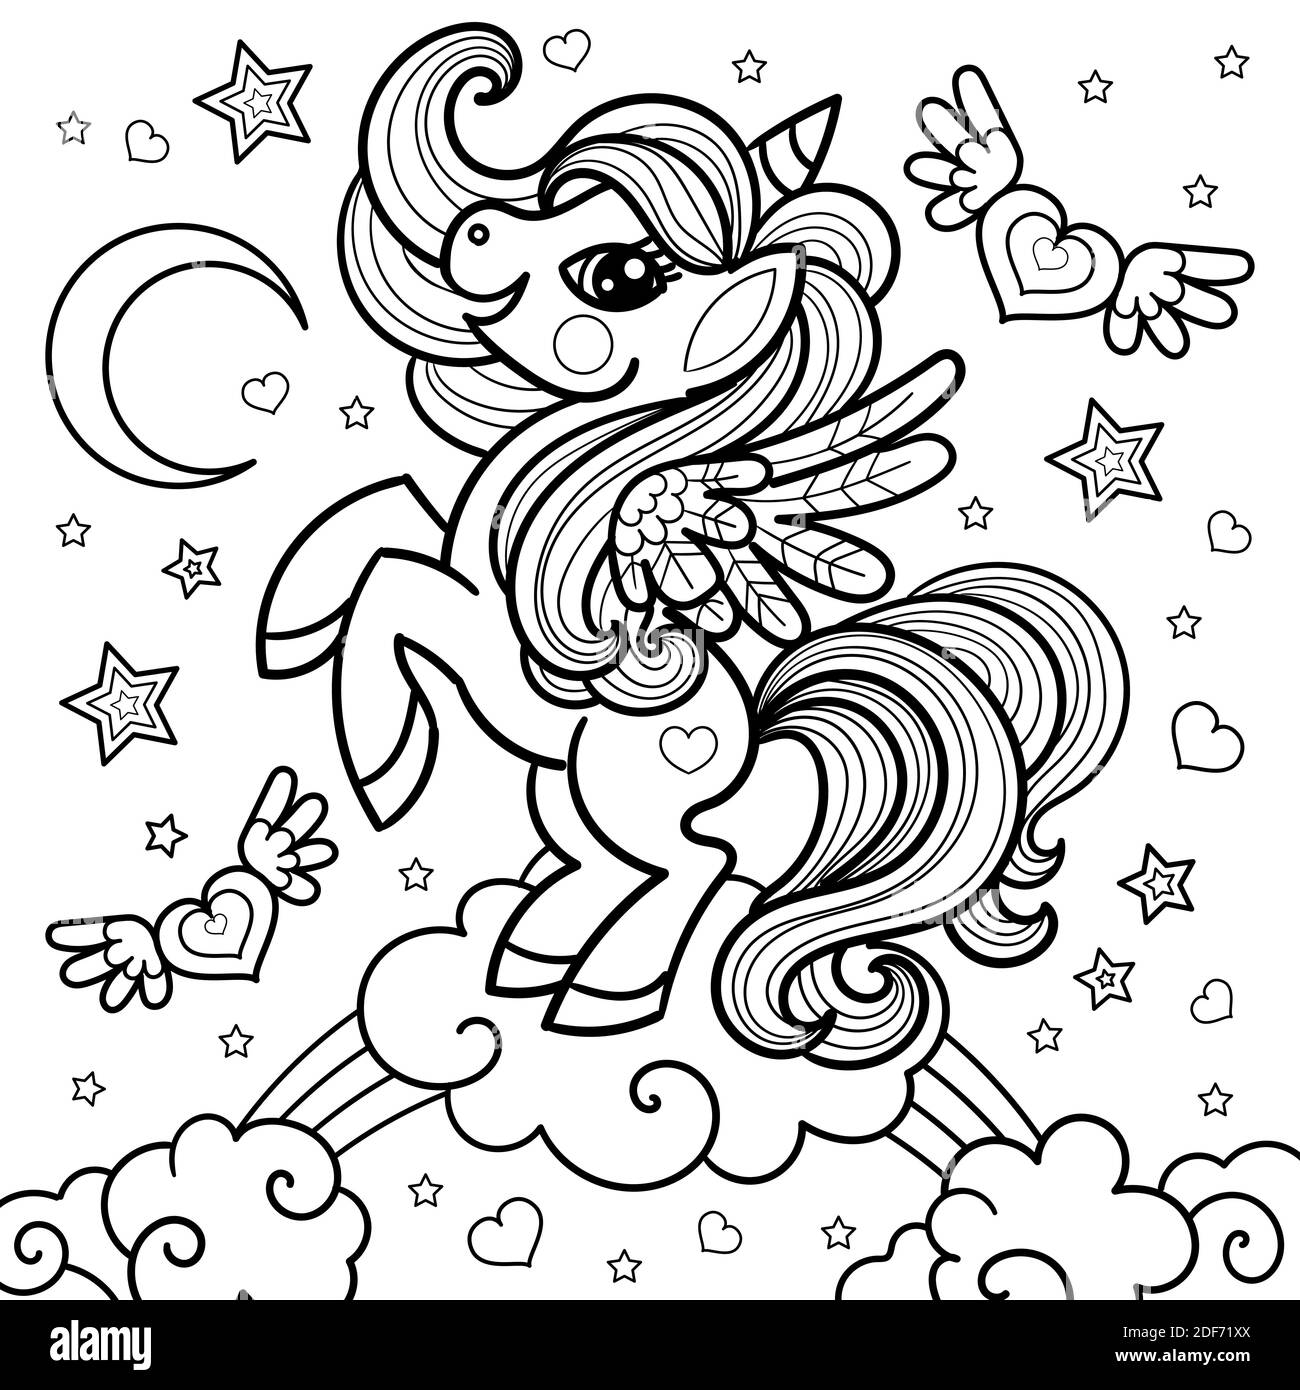 A cartoon unicorn riding a rainbow. Black and white image. Doodle style. For children's design of coloring books, postcards, tattoos, prints. posters, Stock Vector